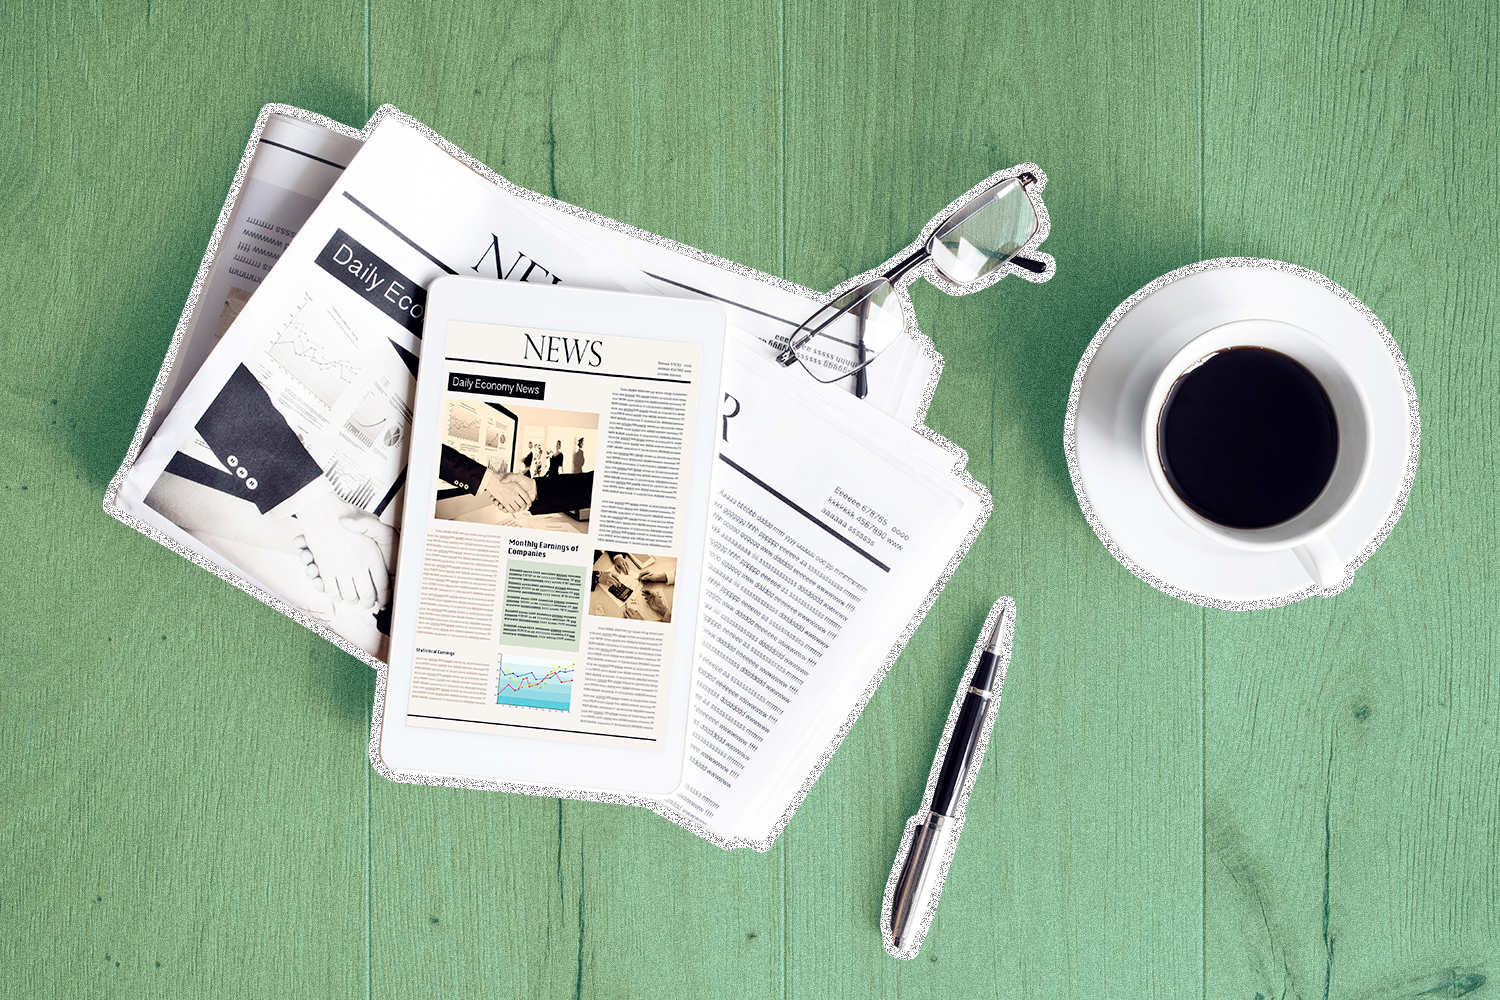 A bird's-eye view of an open newspaper and coffee cup atop a green surface.